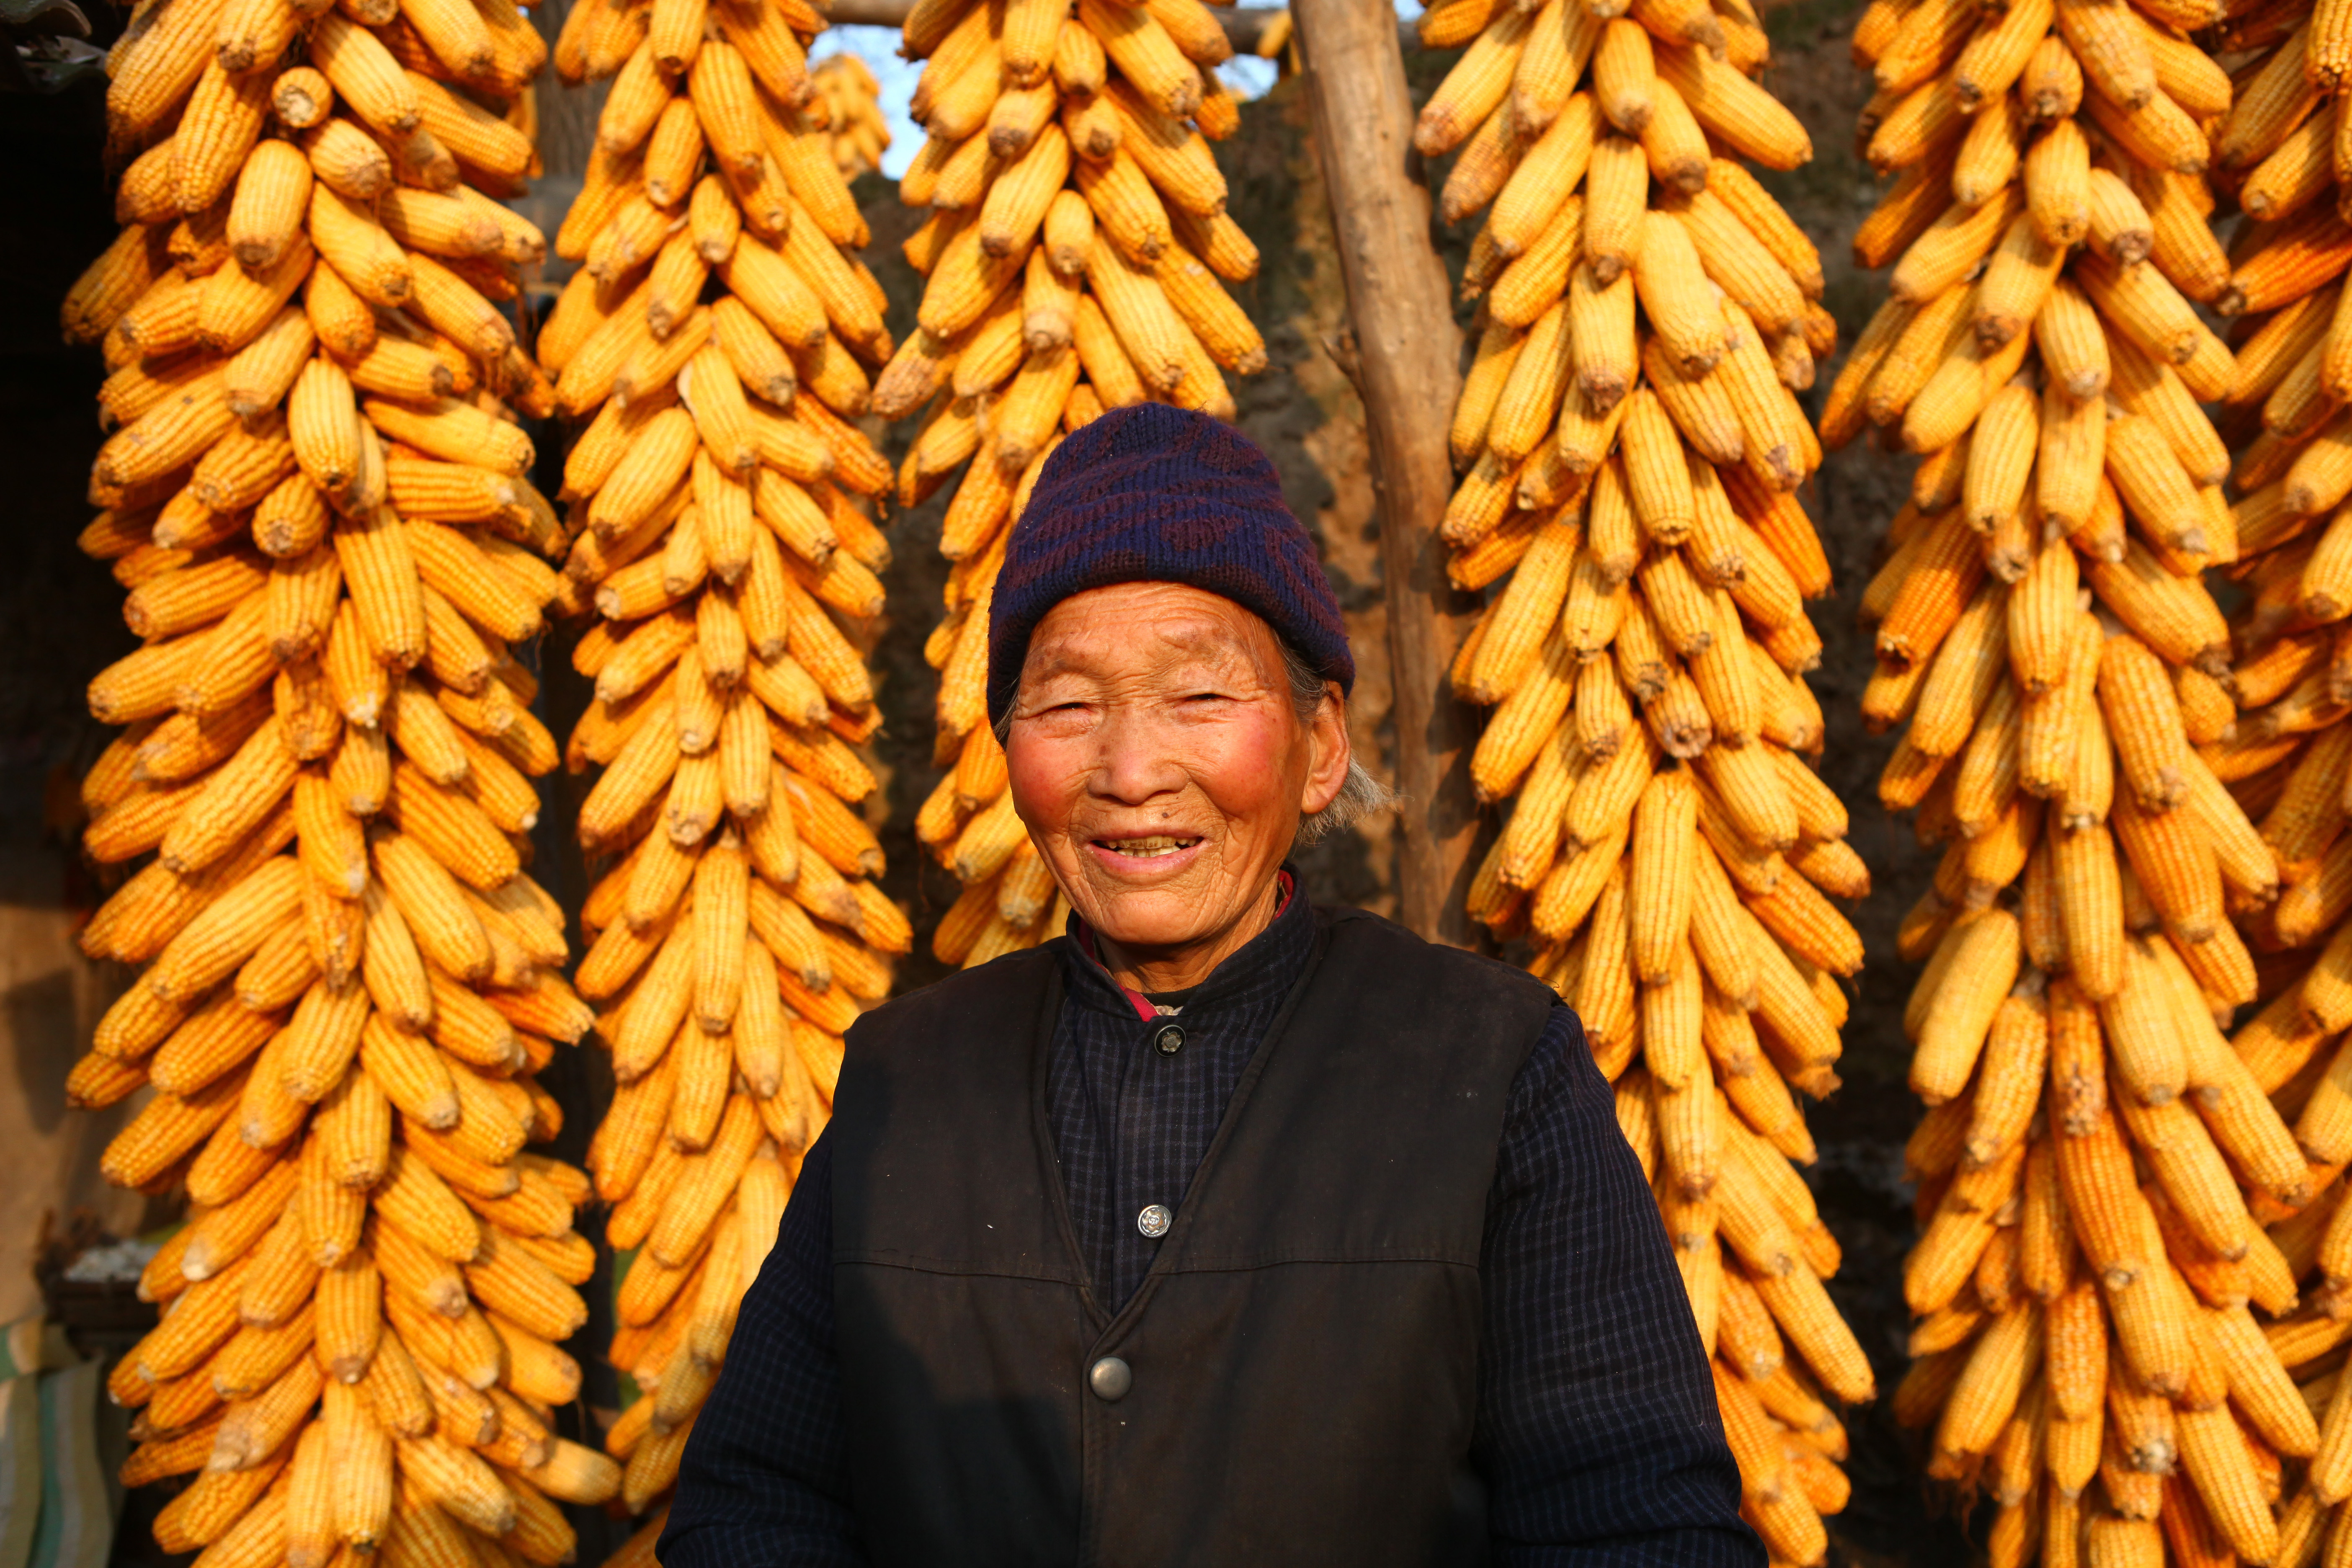 An older woman smiles in front of her corn shop.